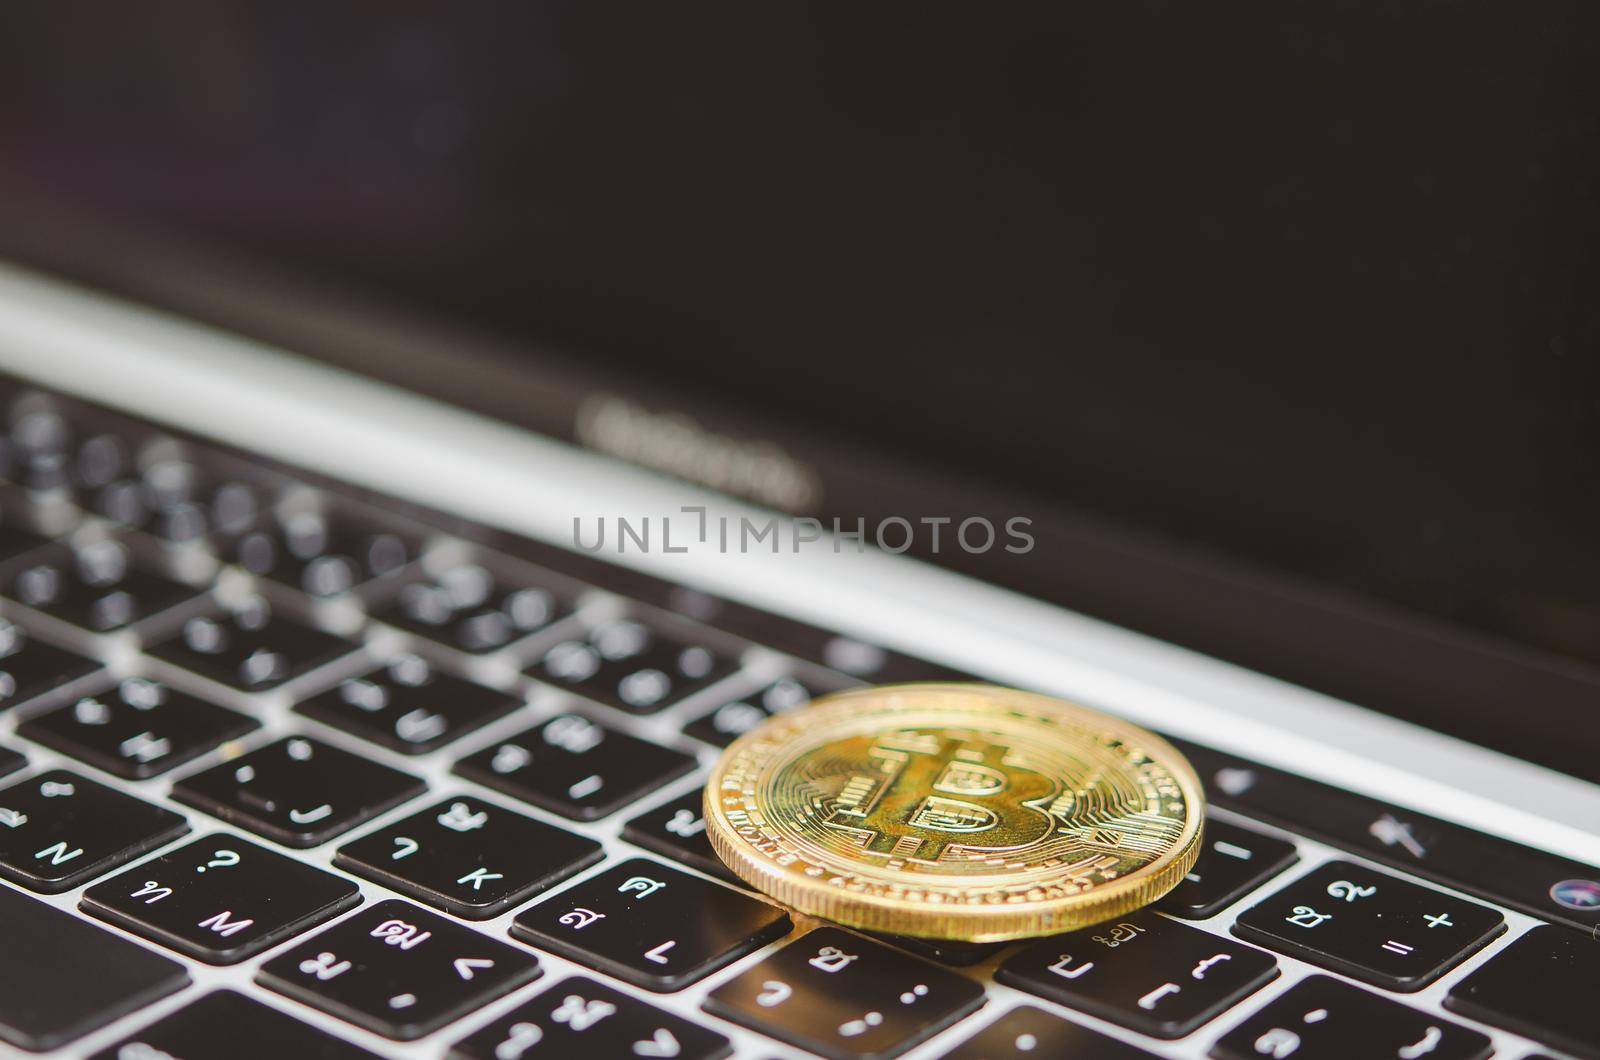 coin currency economy trade market investment digital money crypto bitcoin on keyboard computer laptop.business exchange finance blockchain concept.